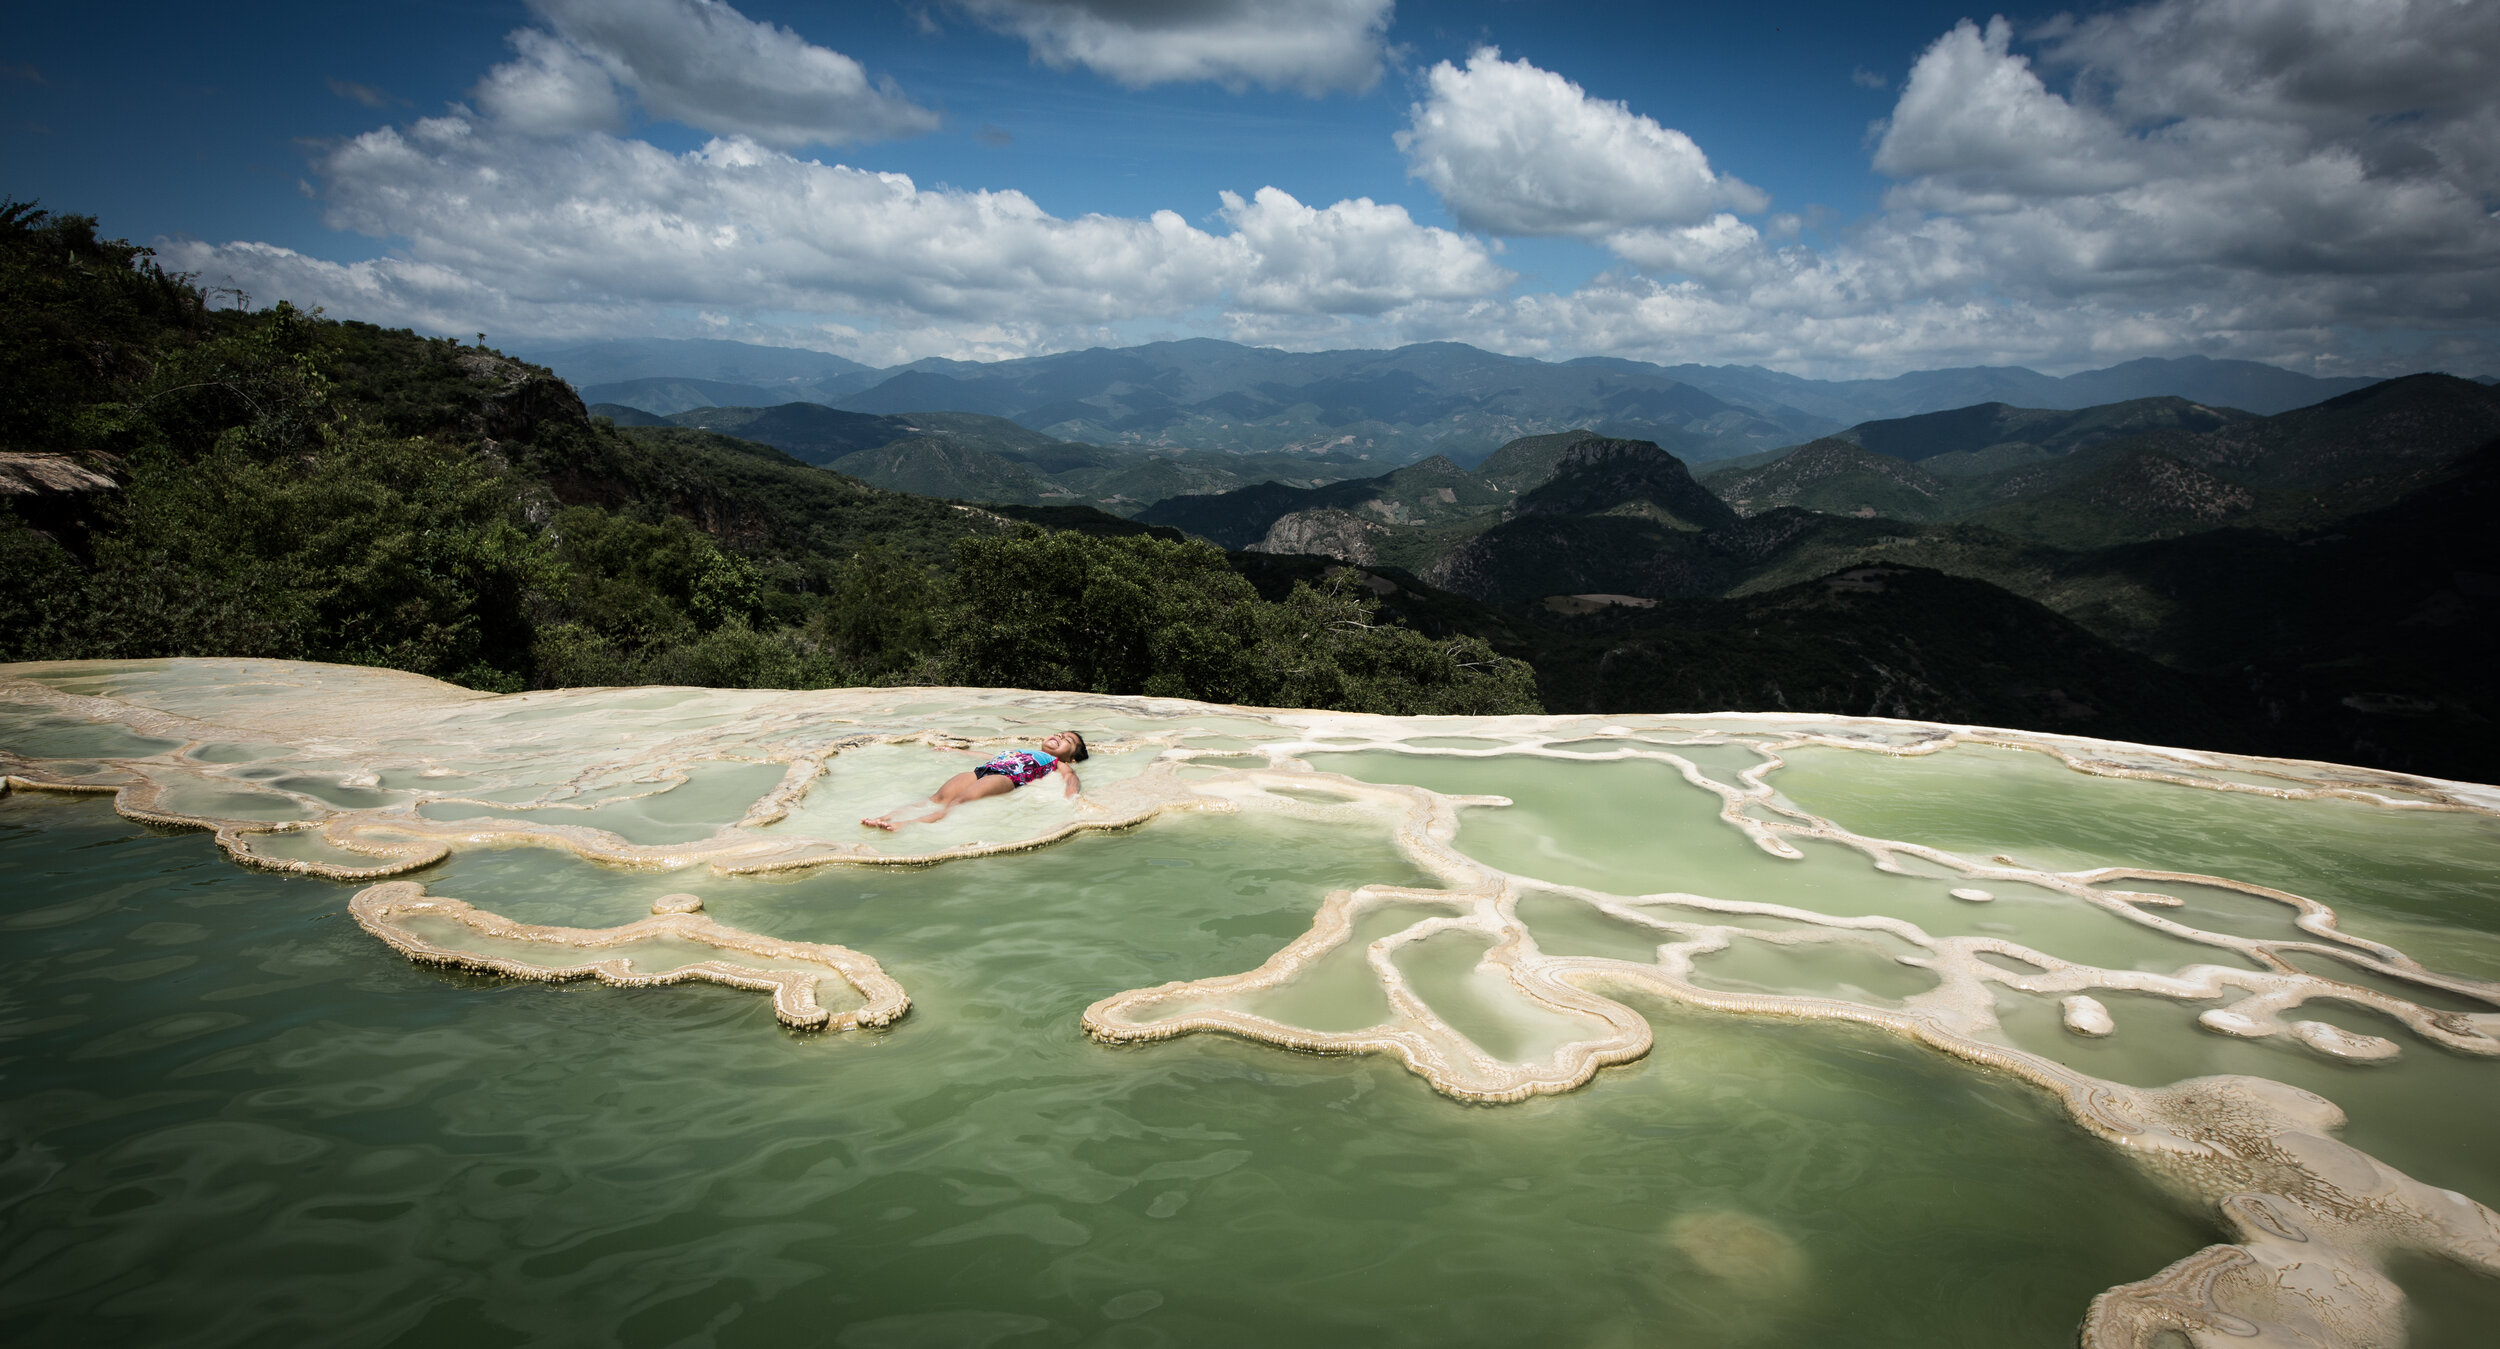  a young girl bathing in the mineral-rich water of Hierve El Agua, Oaxaca, Mexico, August 2017 